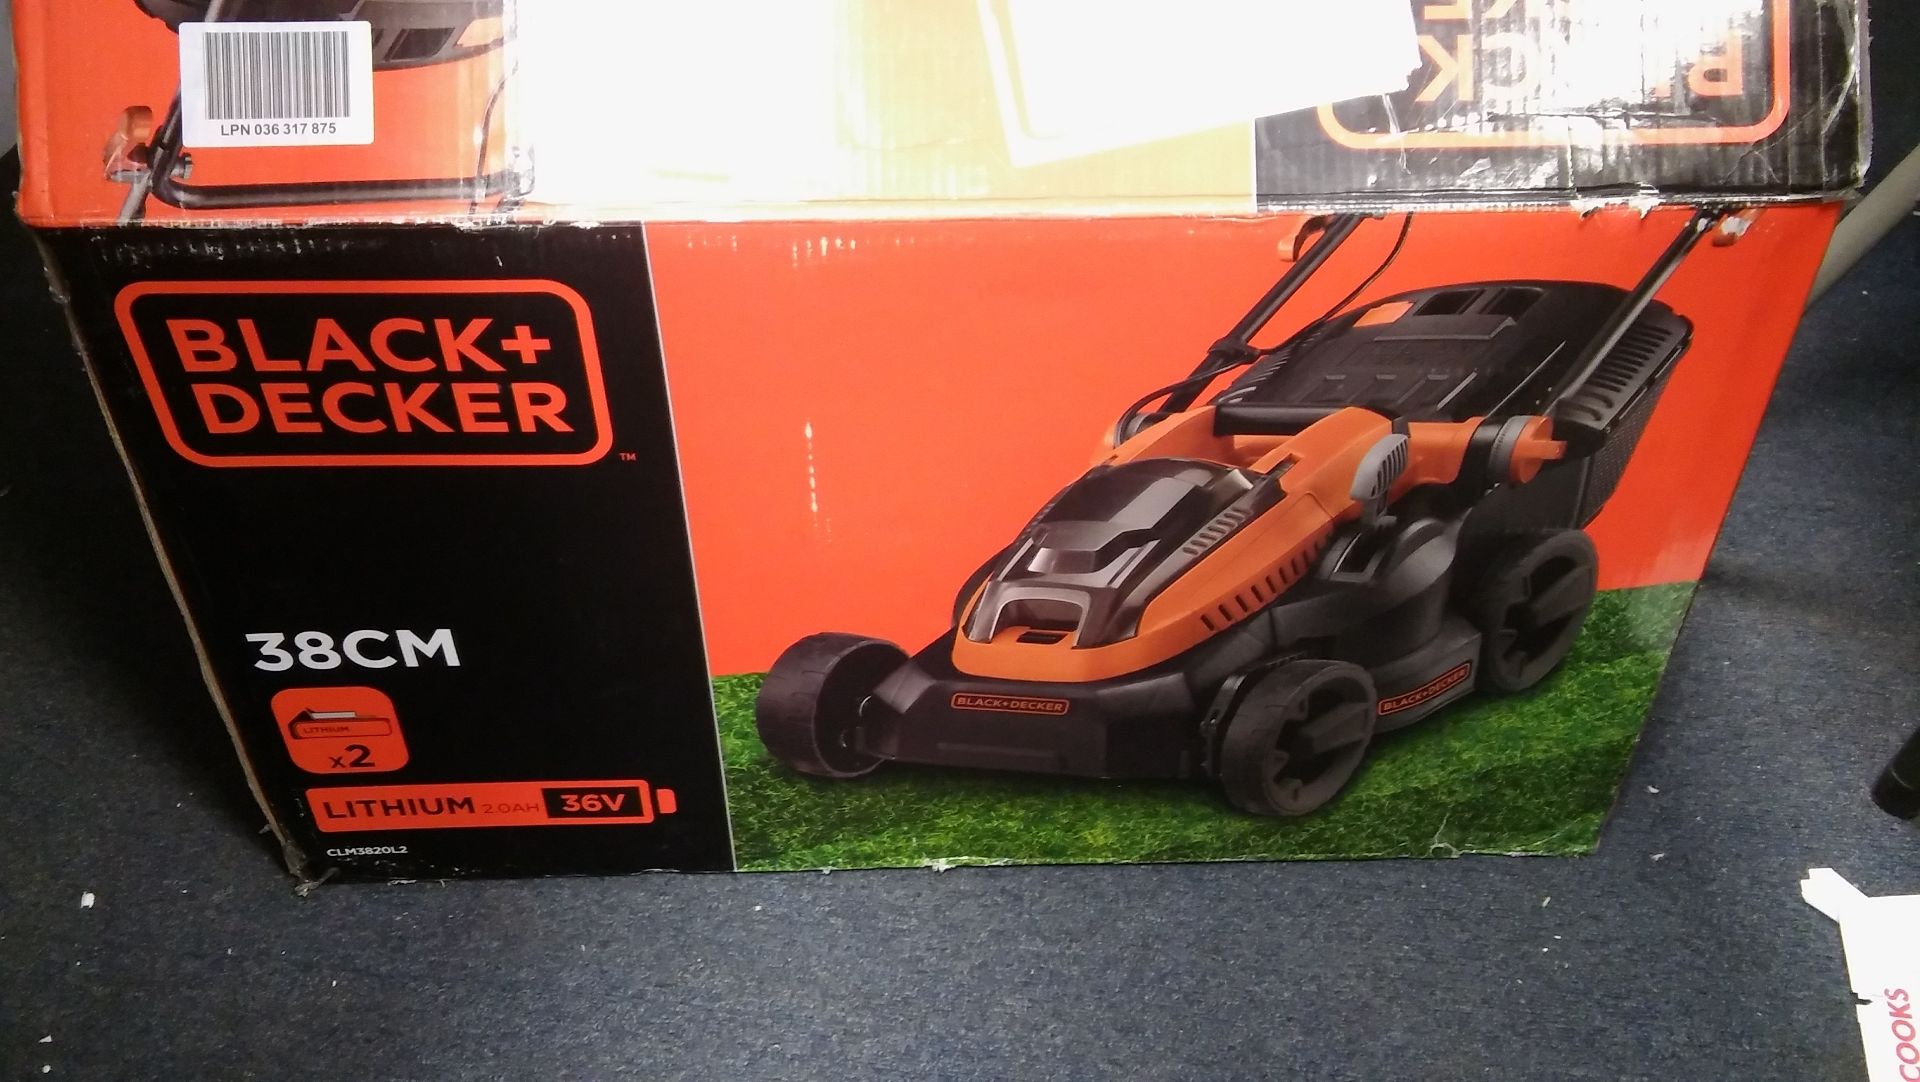 Black and Decker 36v lithium ion cordless lawnmower with a 38cm cutting diameter.Bad packaging